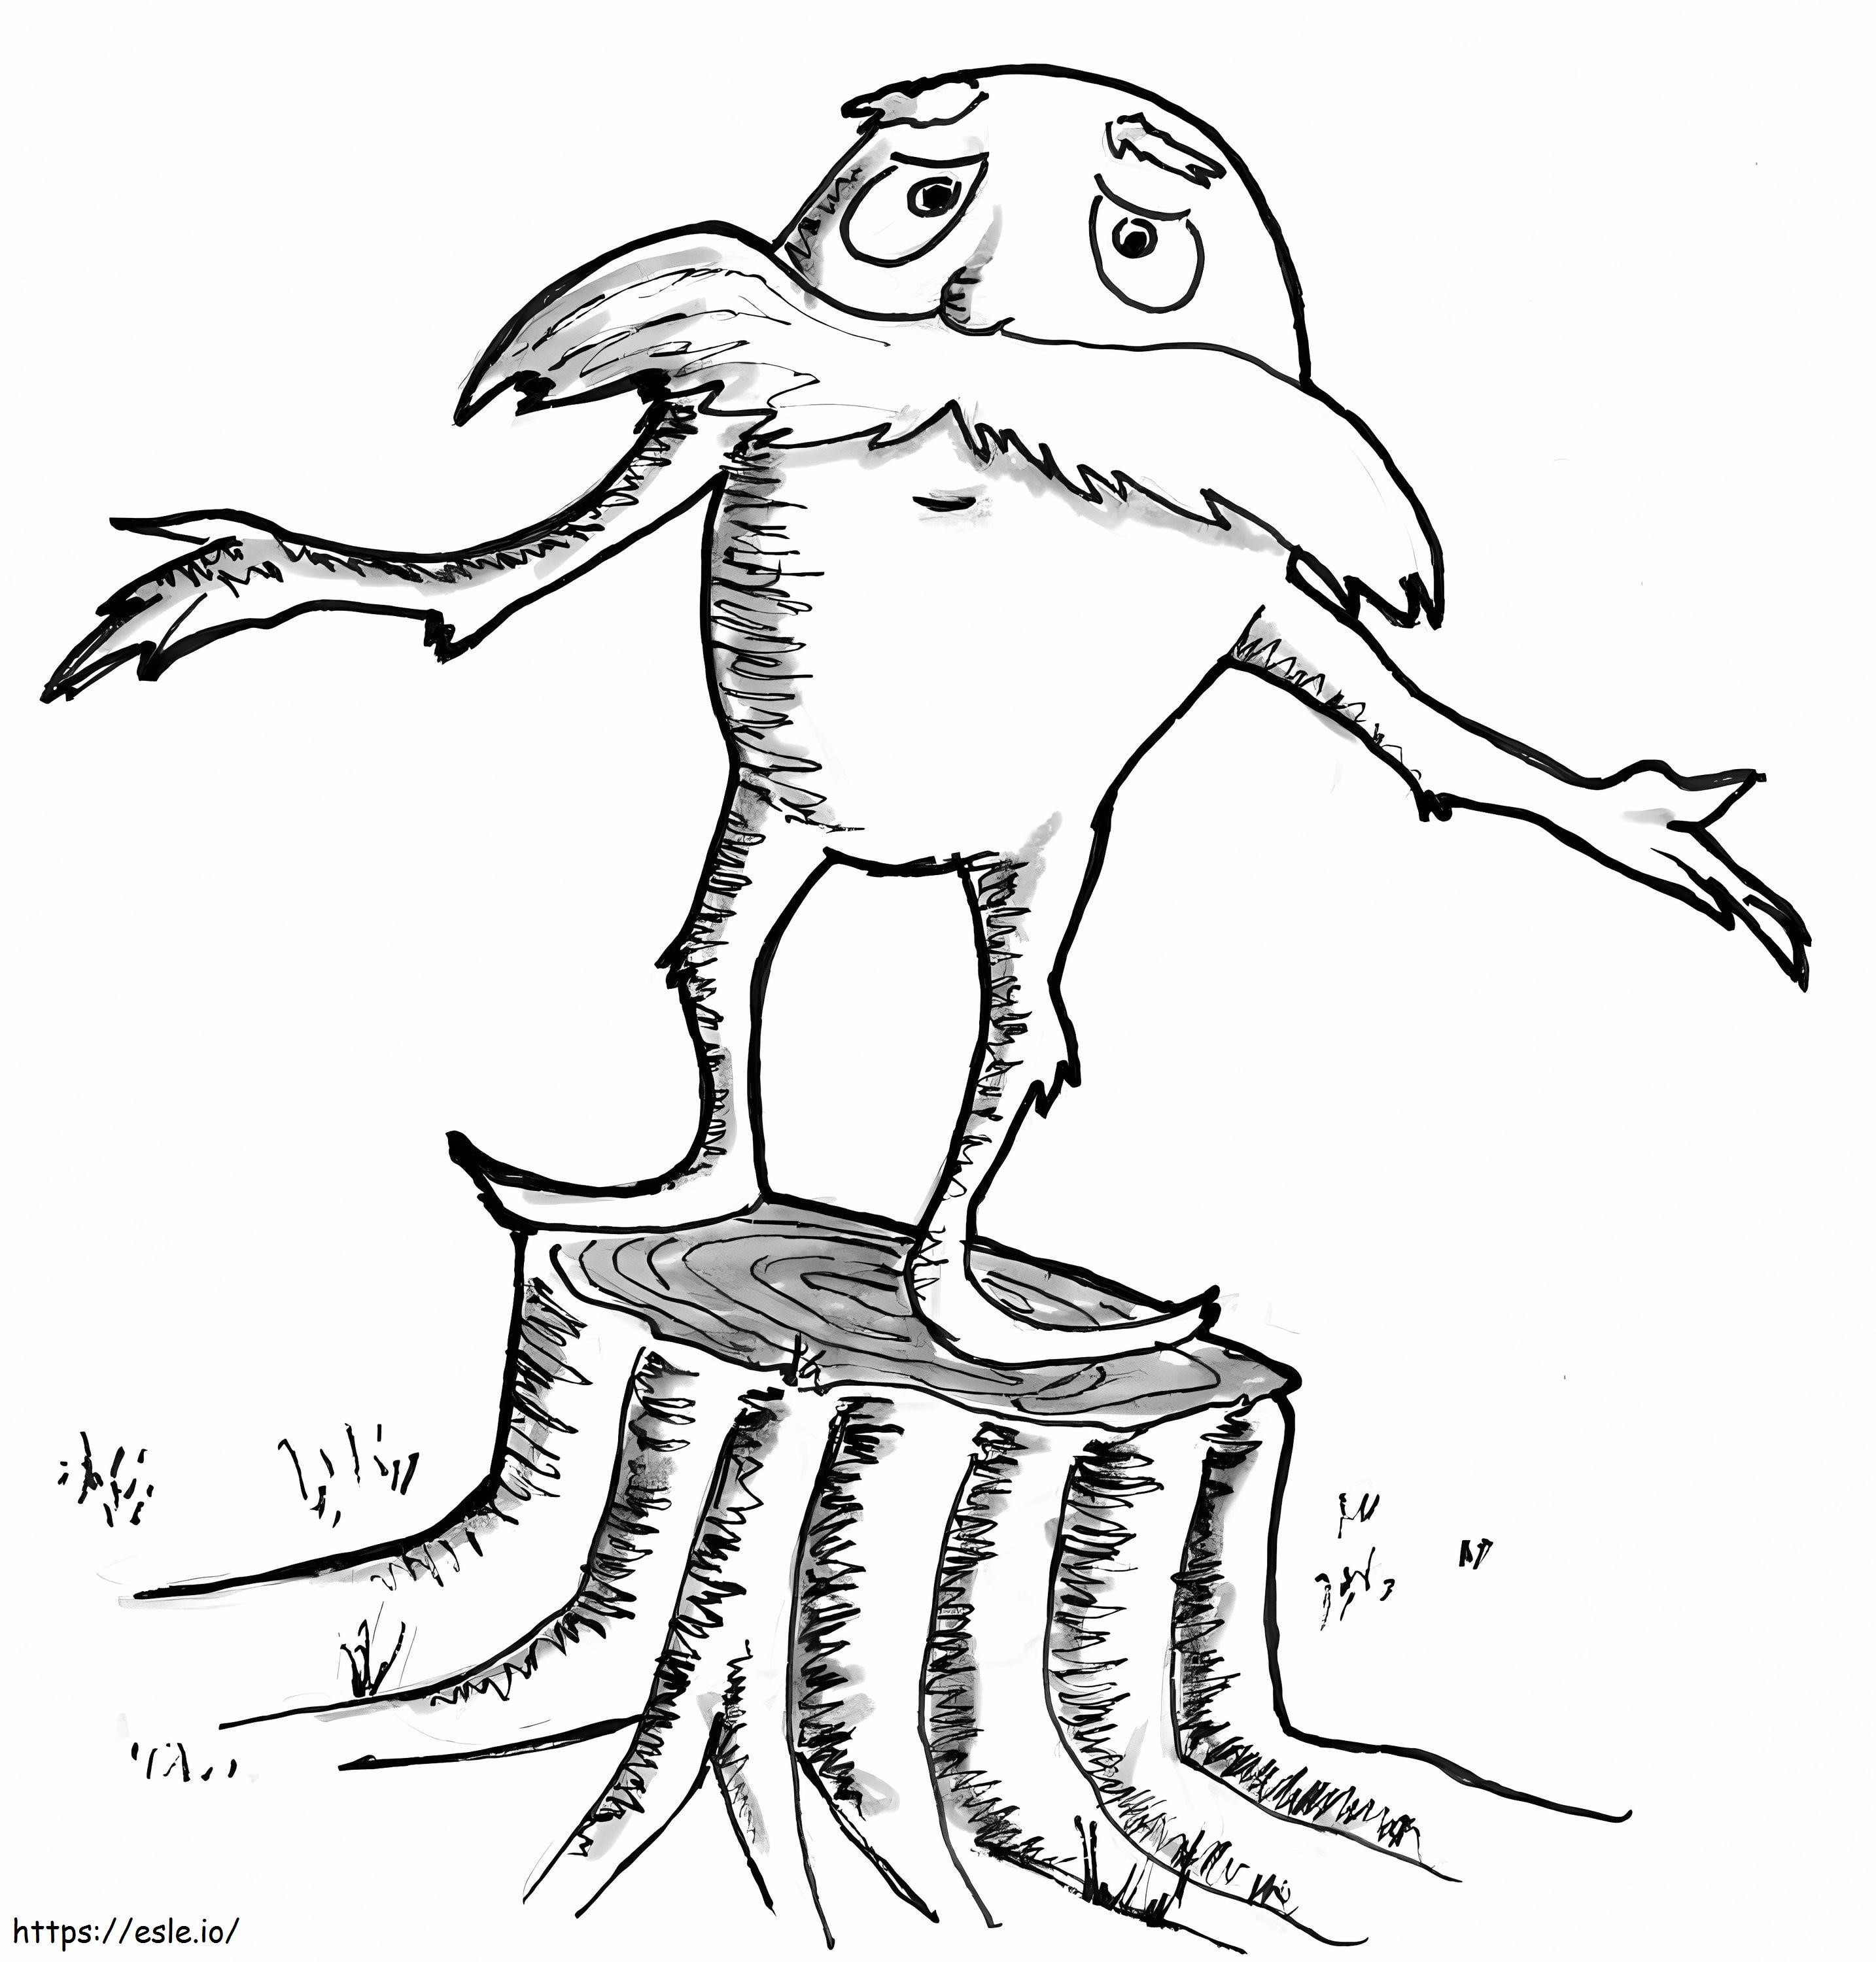 Lorax 2 coloring page